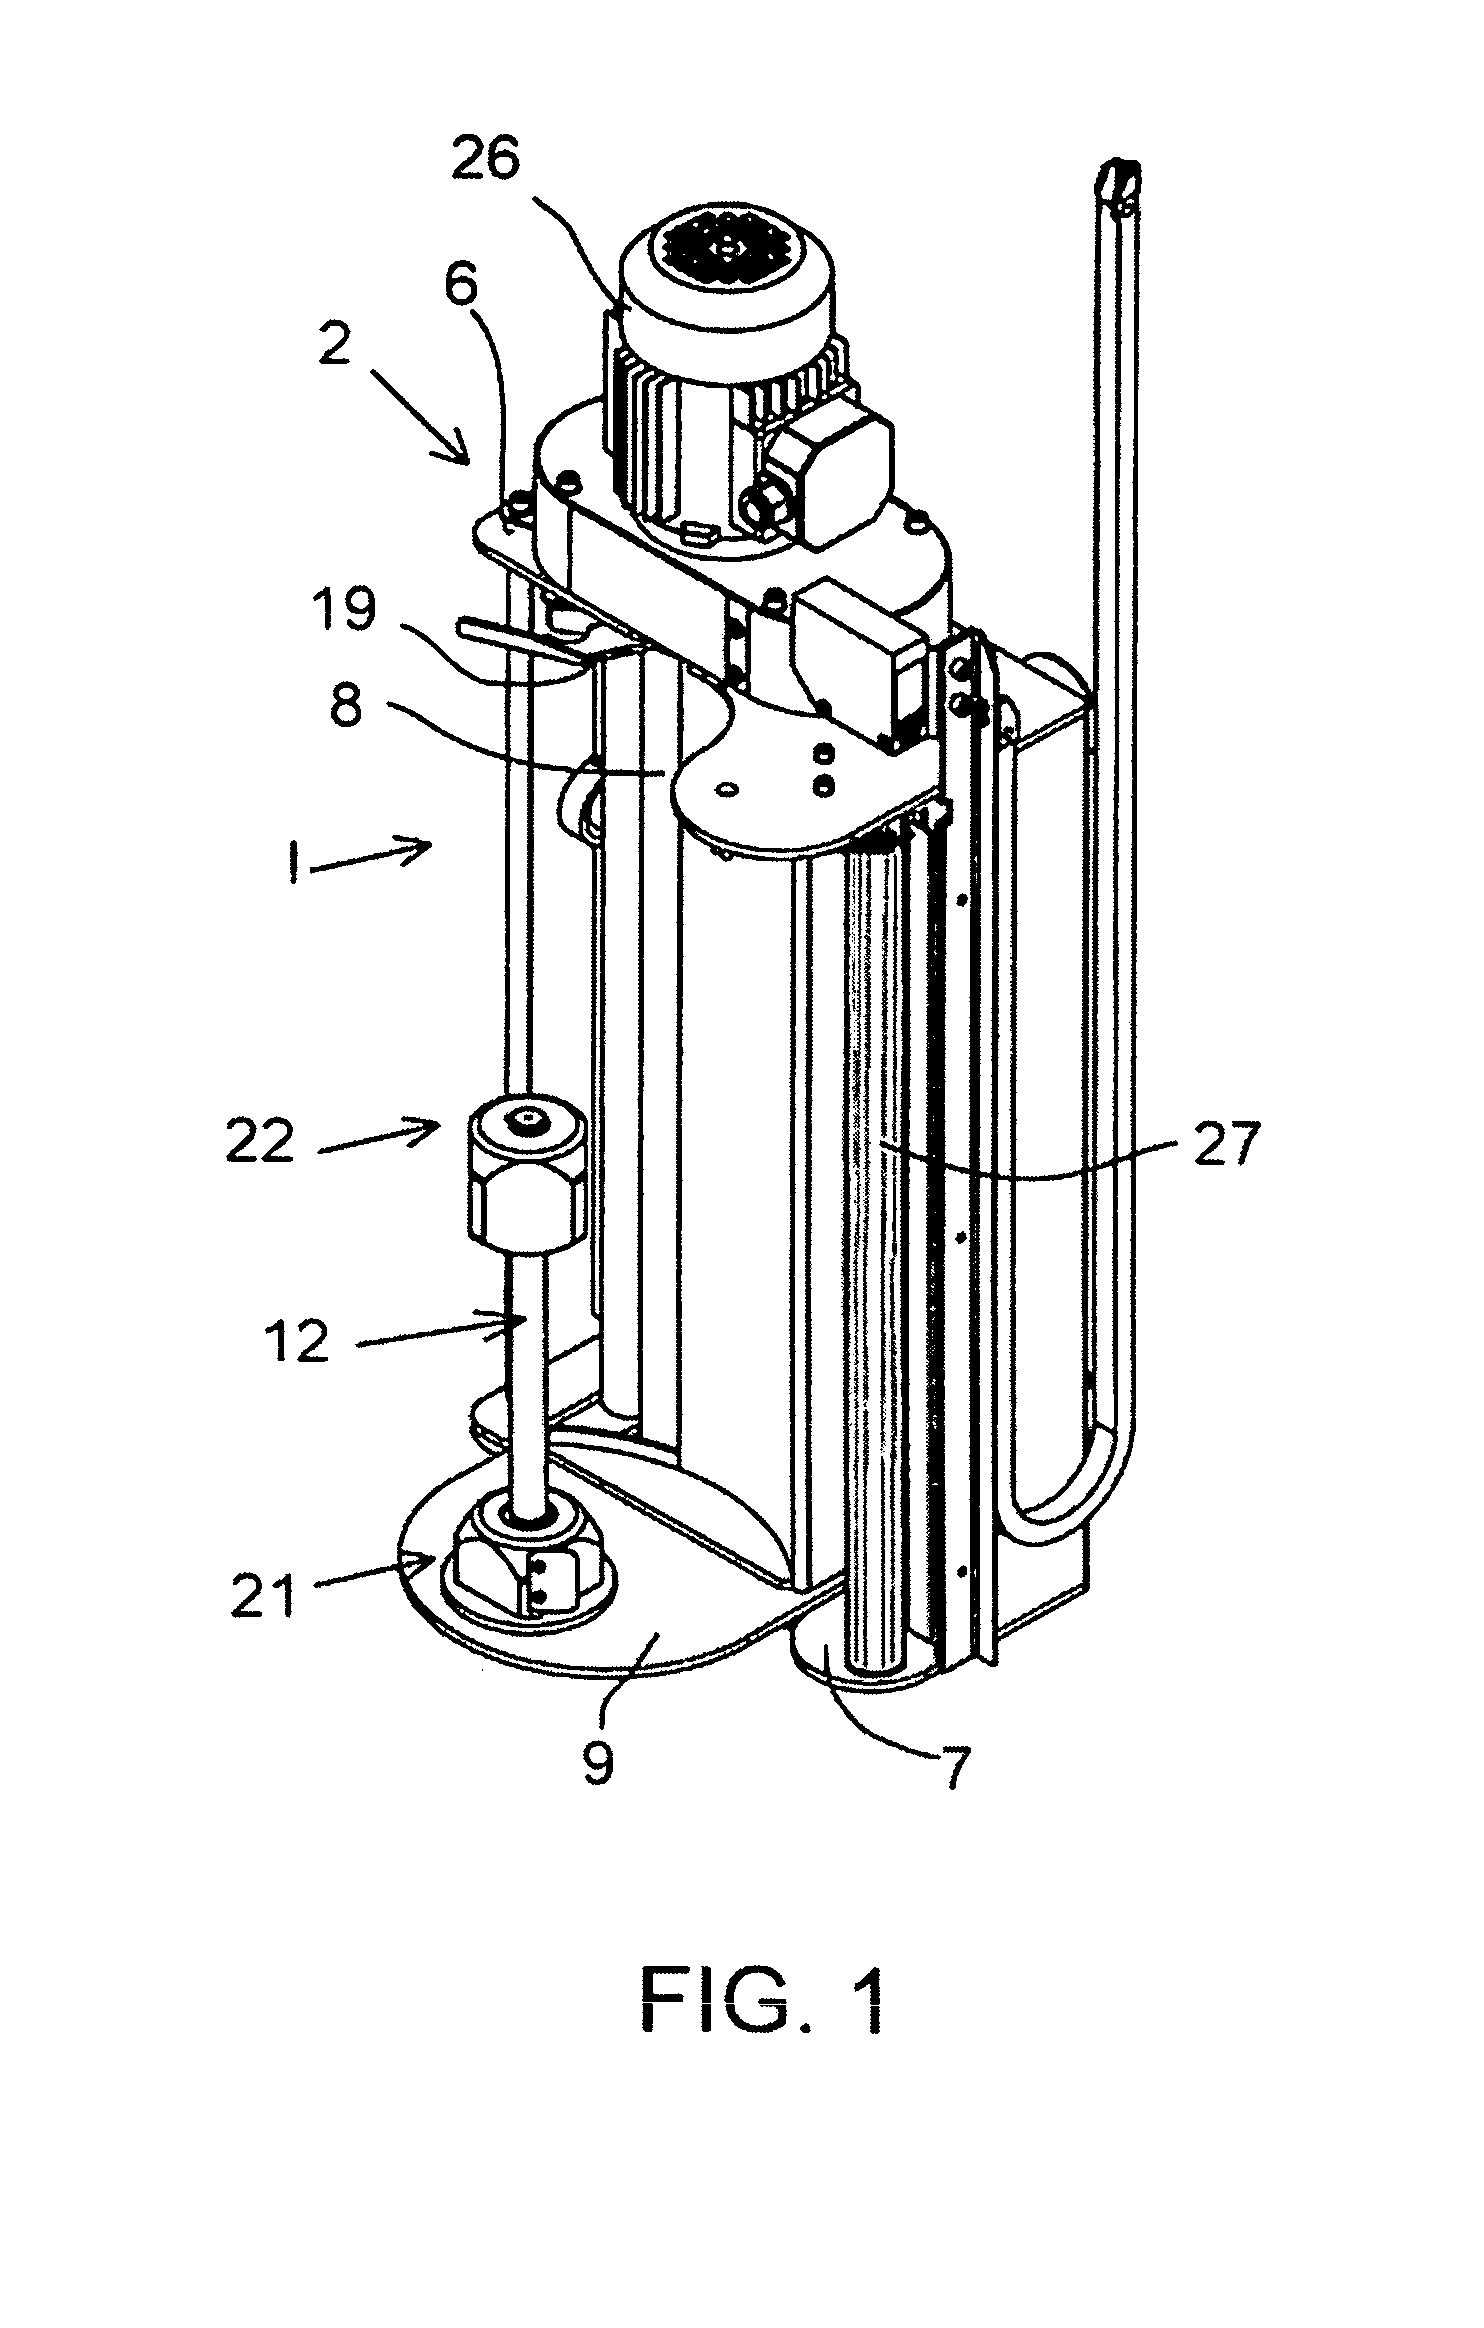 Wrapping apparatus comprising a dispenser for dispensing stretched wrap film